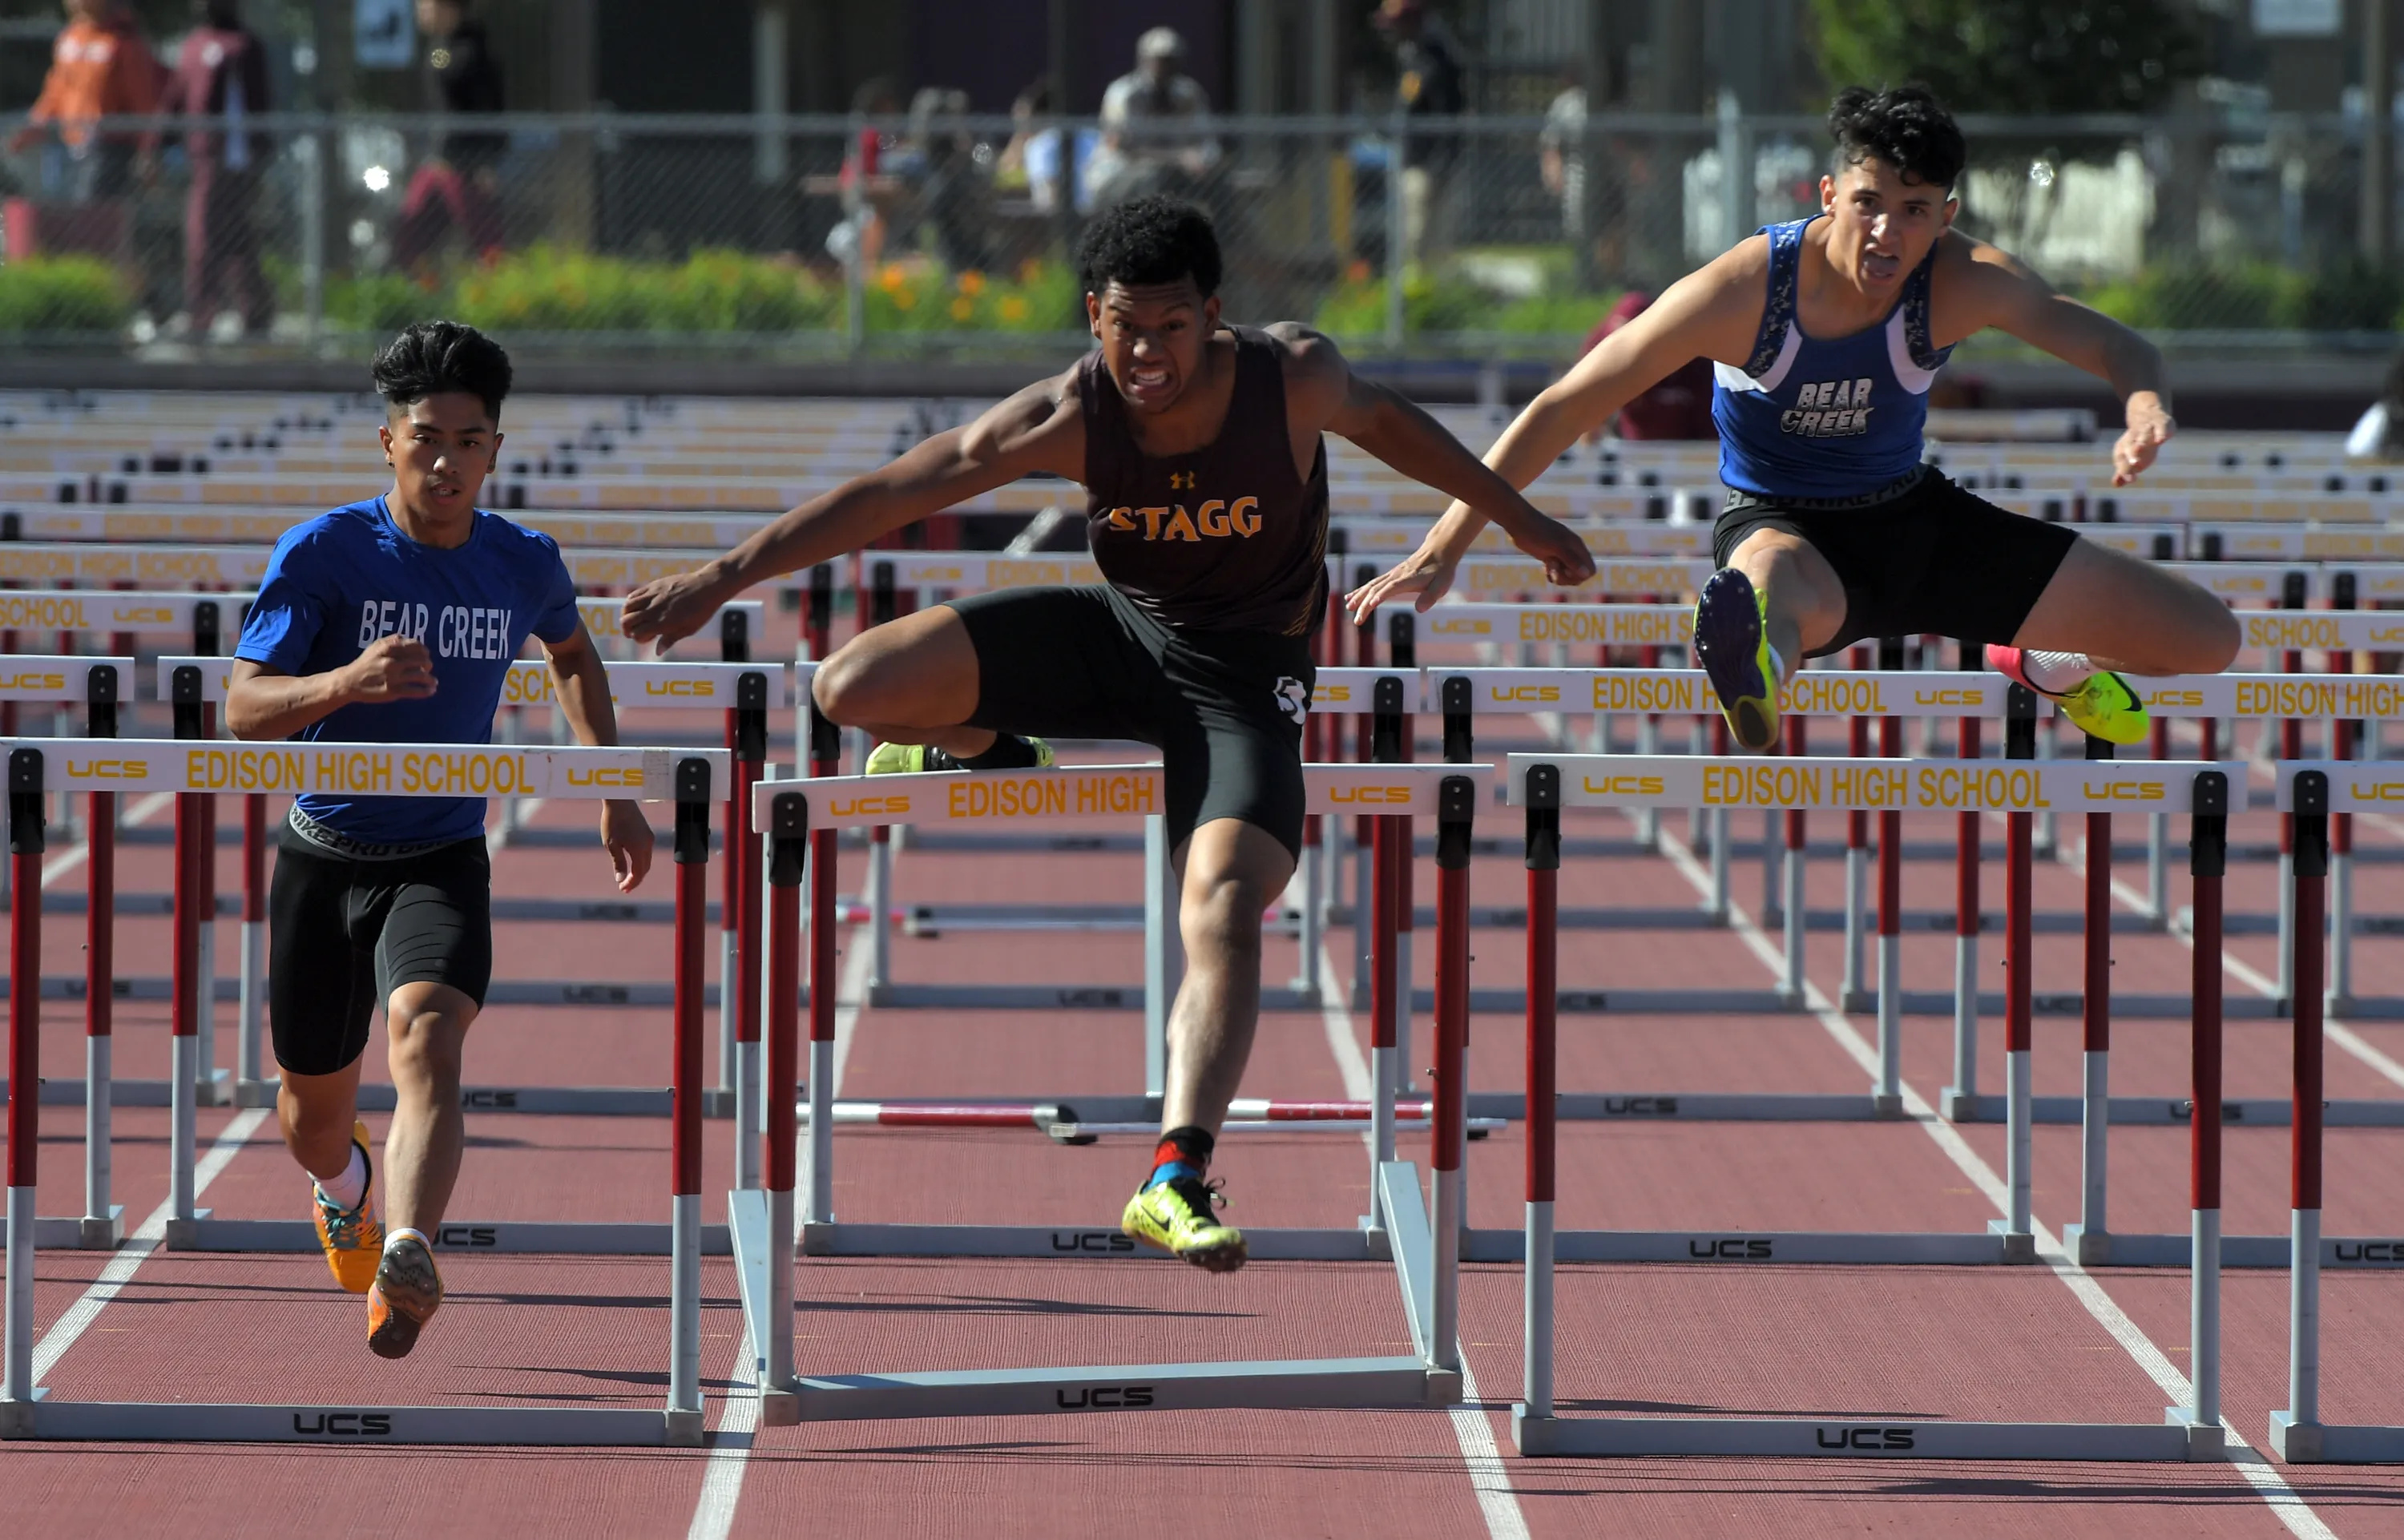 Hurdling: 110 m hurdles, The sport of running with obstacles, Sprint race with hurdles, Hurdle championship. 3000x1930 HD Wallpaper.